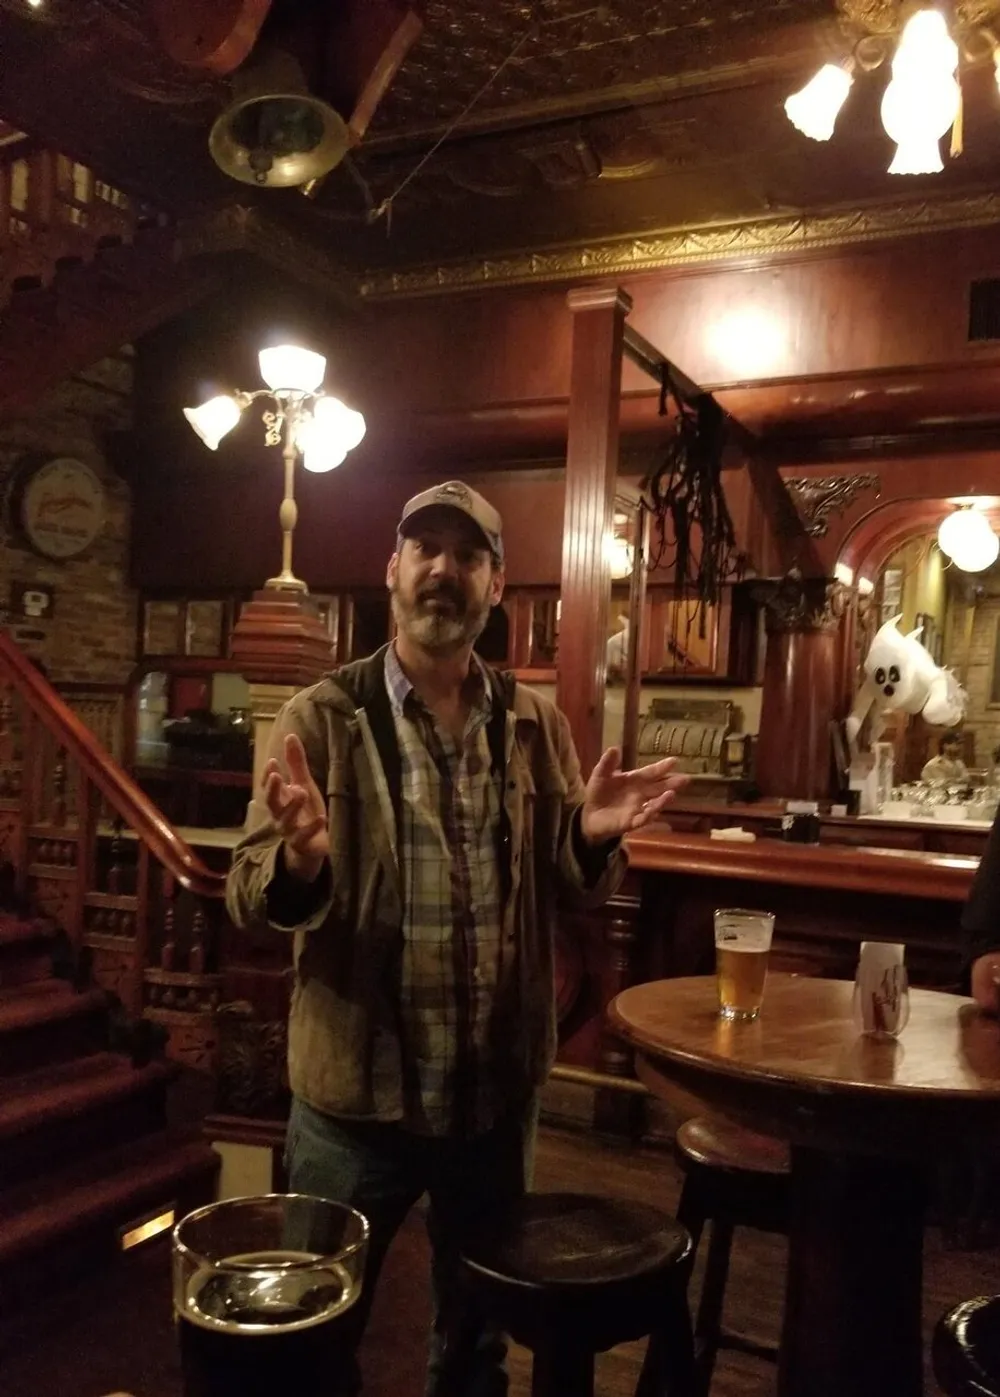 A man in a cap and plaid shirt is standing with his hands open in a dimly lit pub with a beer on the table in front of him